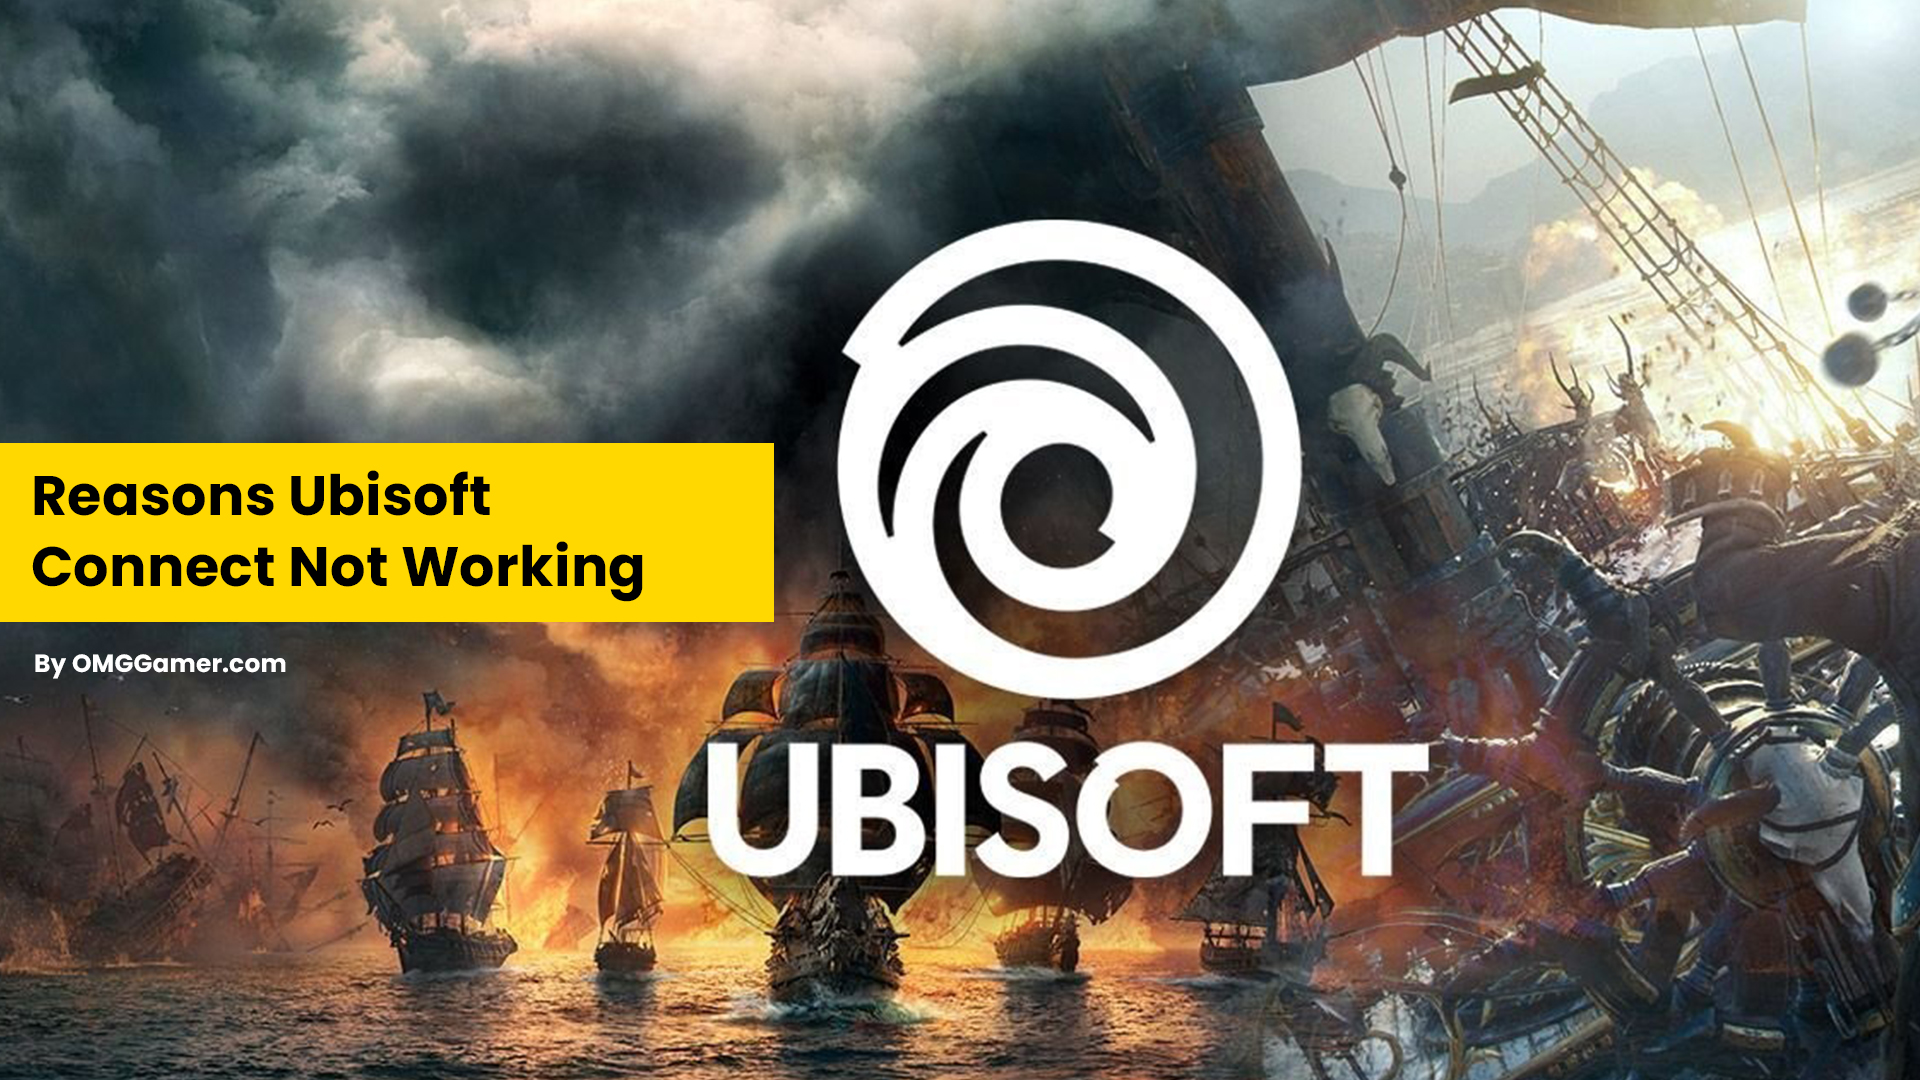 Reasons Ubisoft Connect Not Working